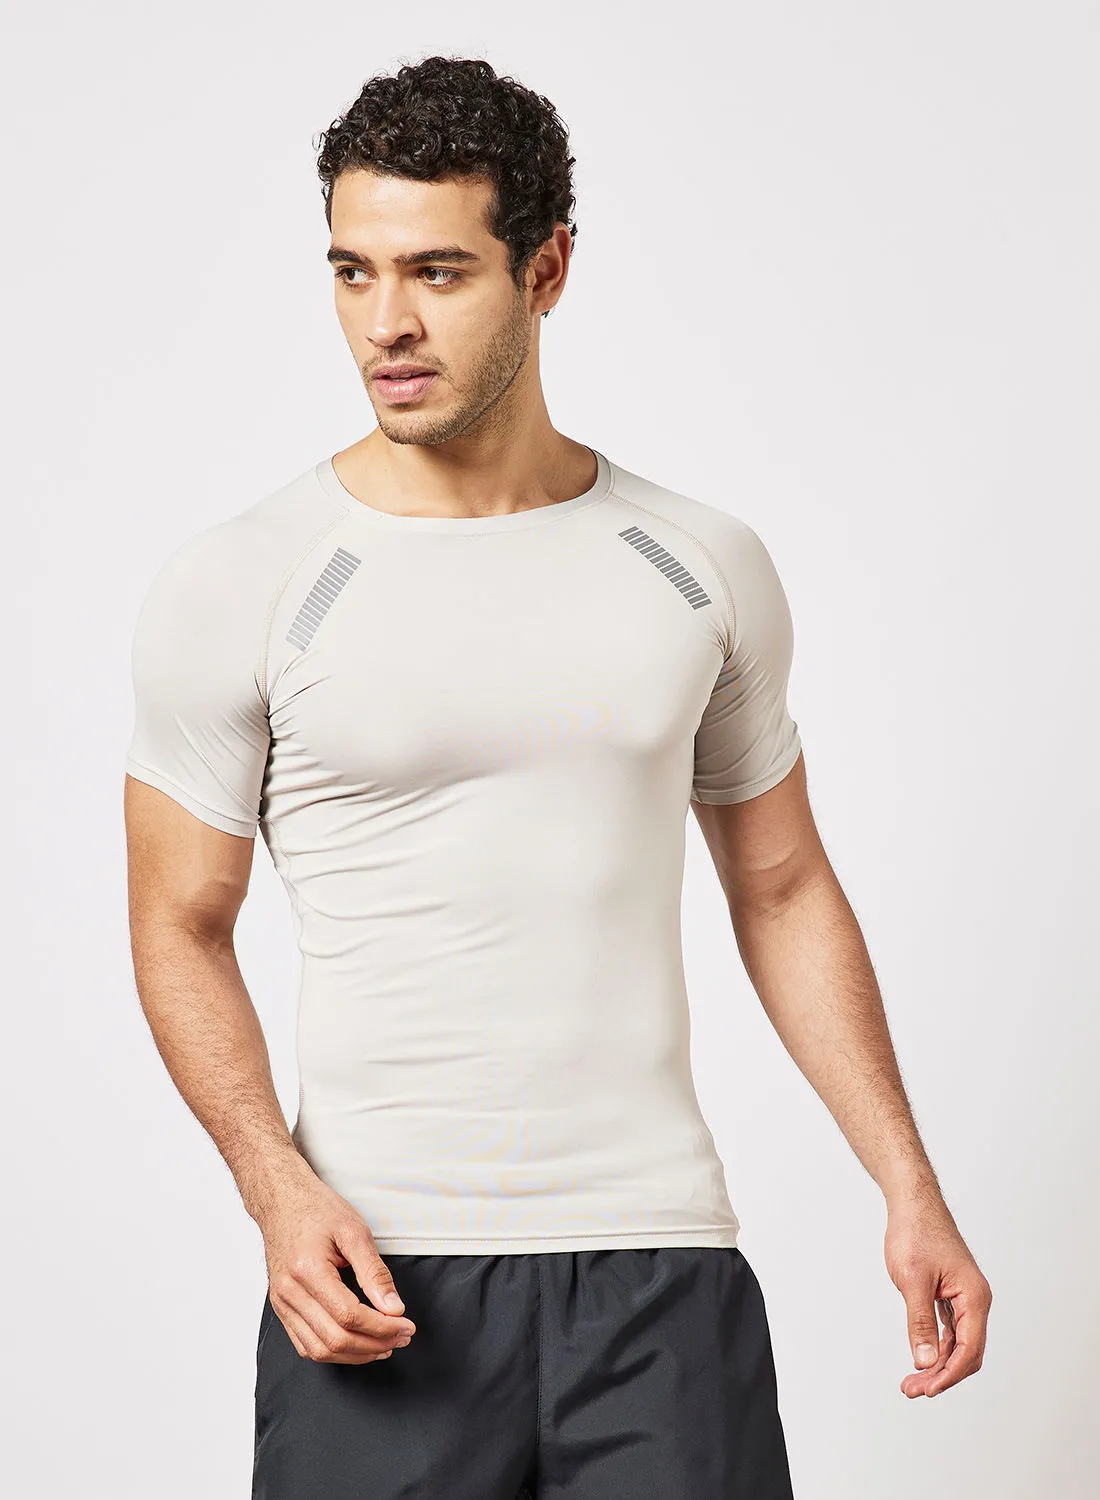 STATE 8 Active Sports T-Shirt رمادي فاتح